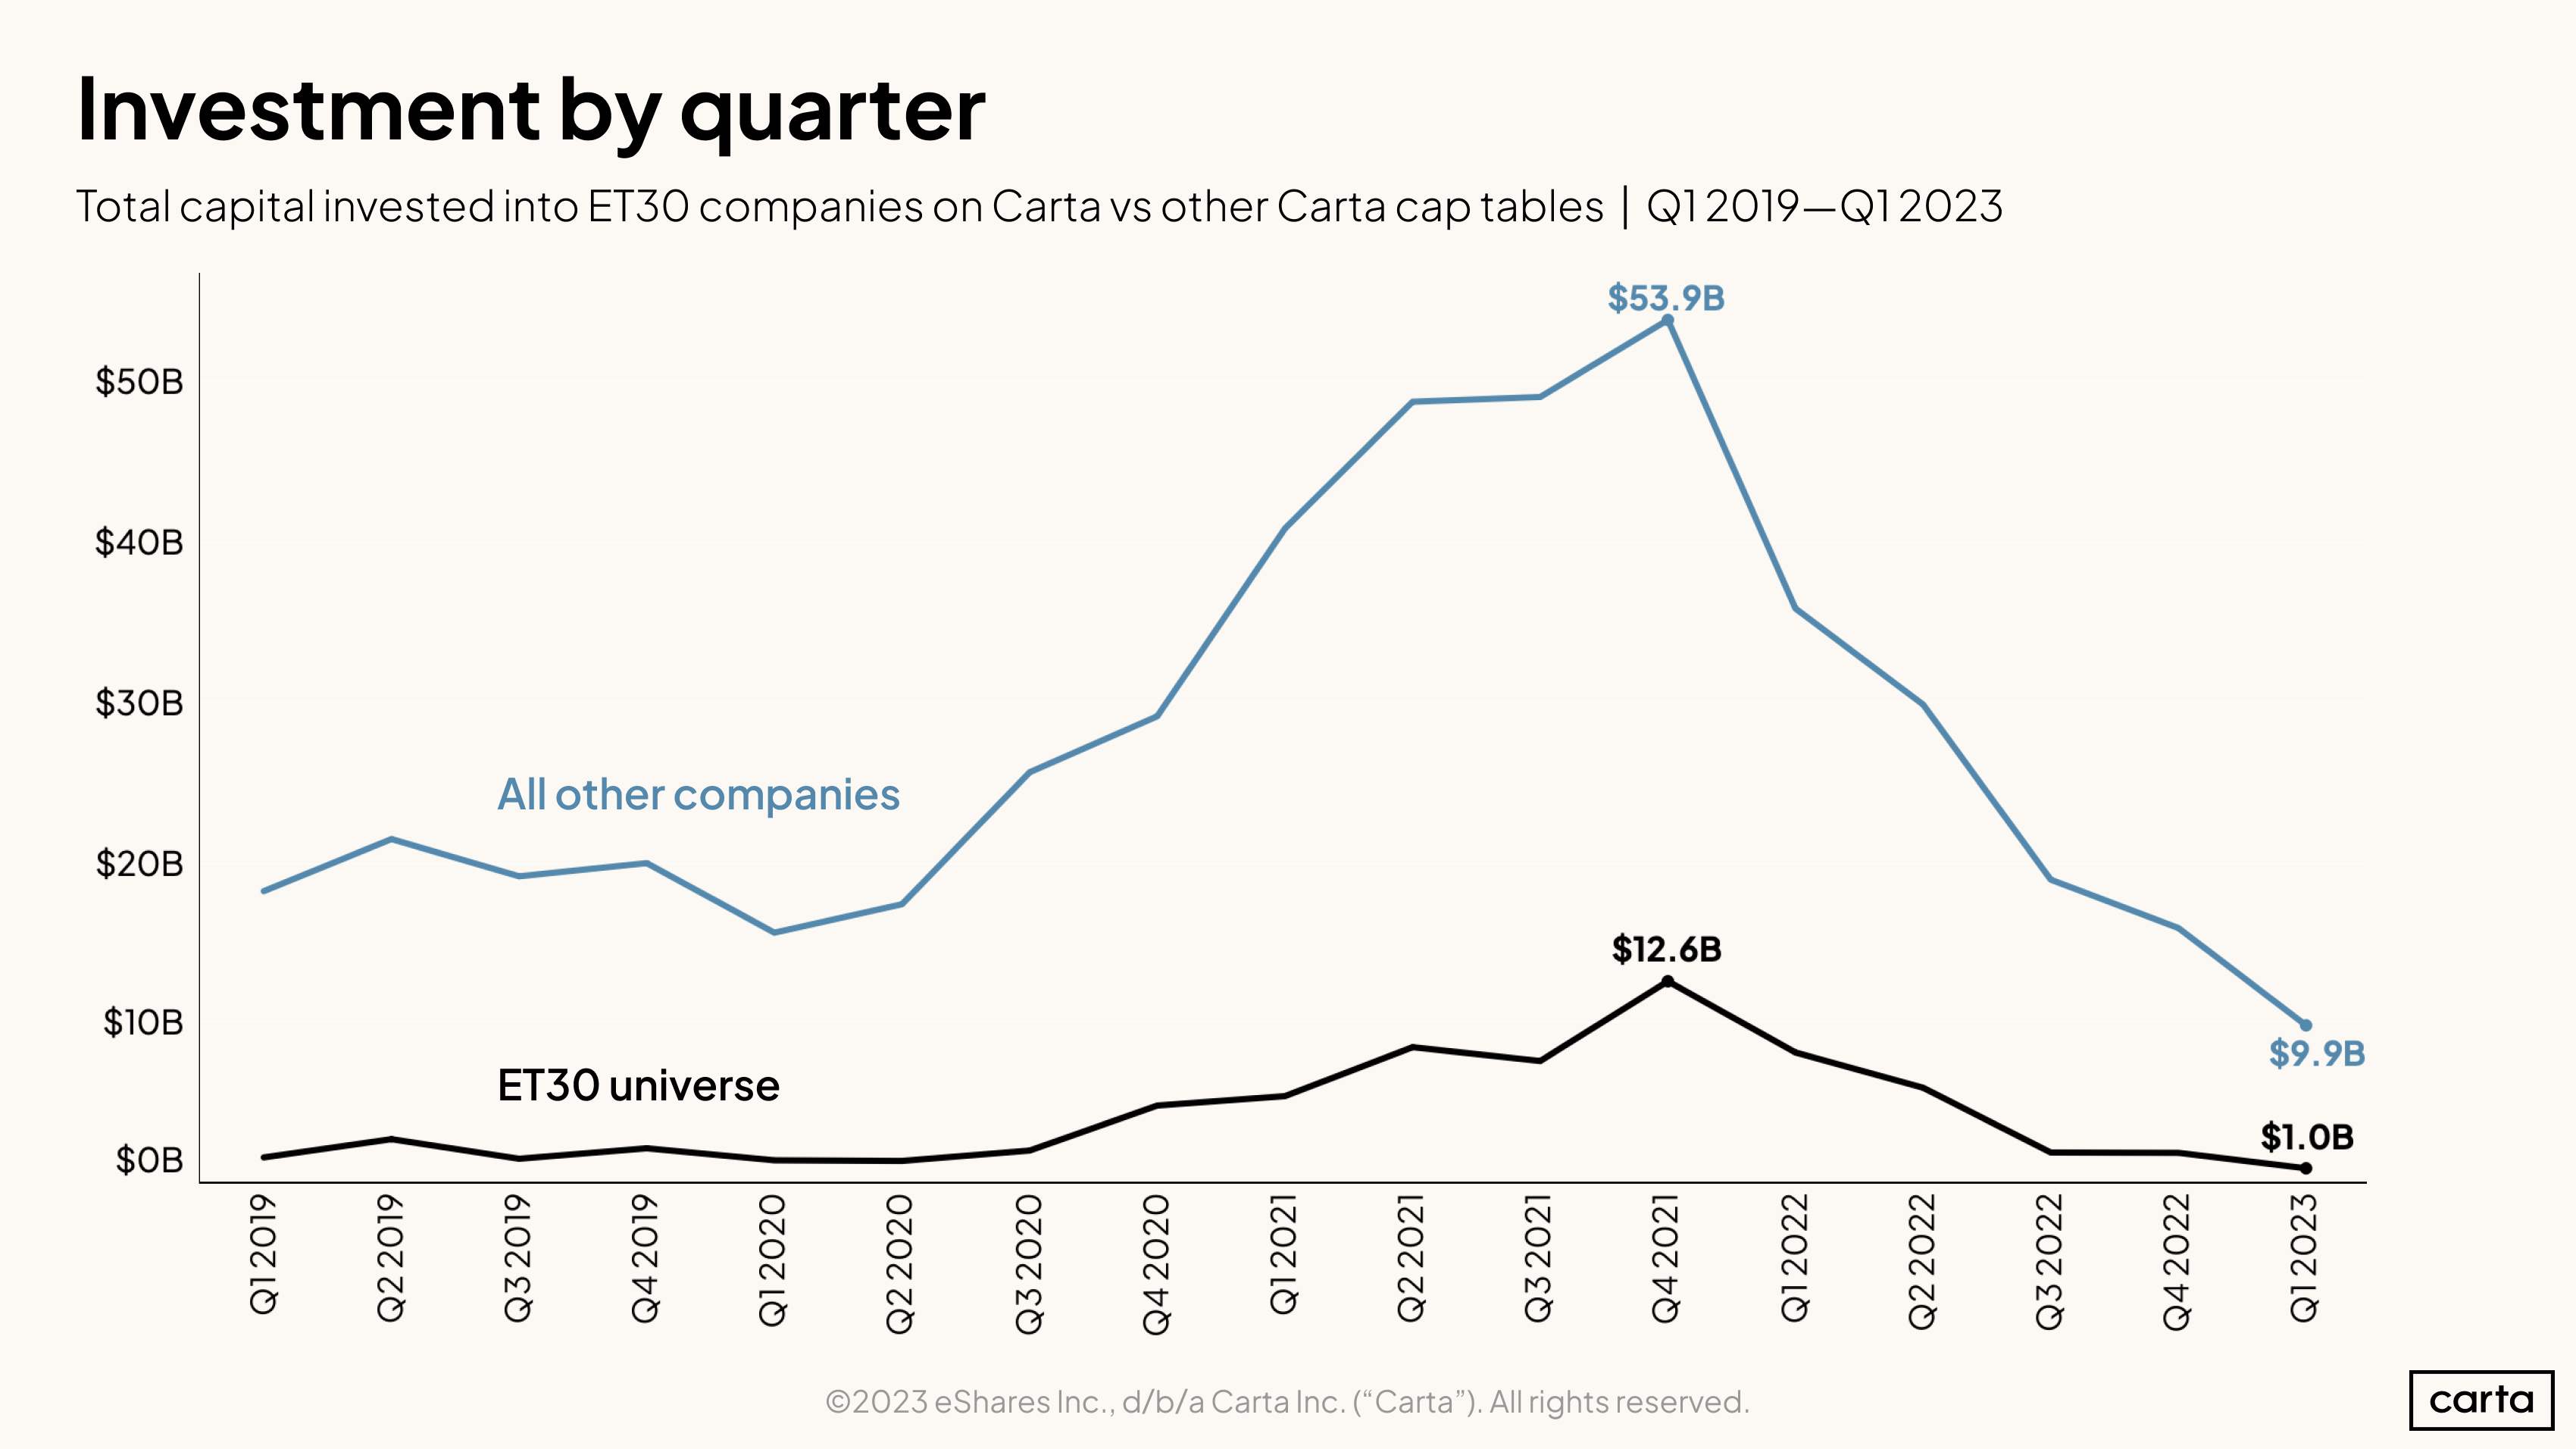 Total capital invested into ET3O companies on Carta vs other Carta cap tables Q1 2019-Q1 2023